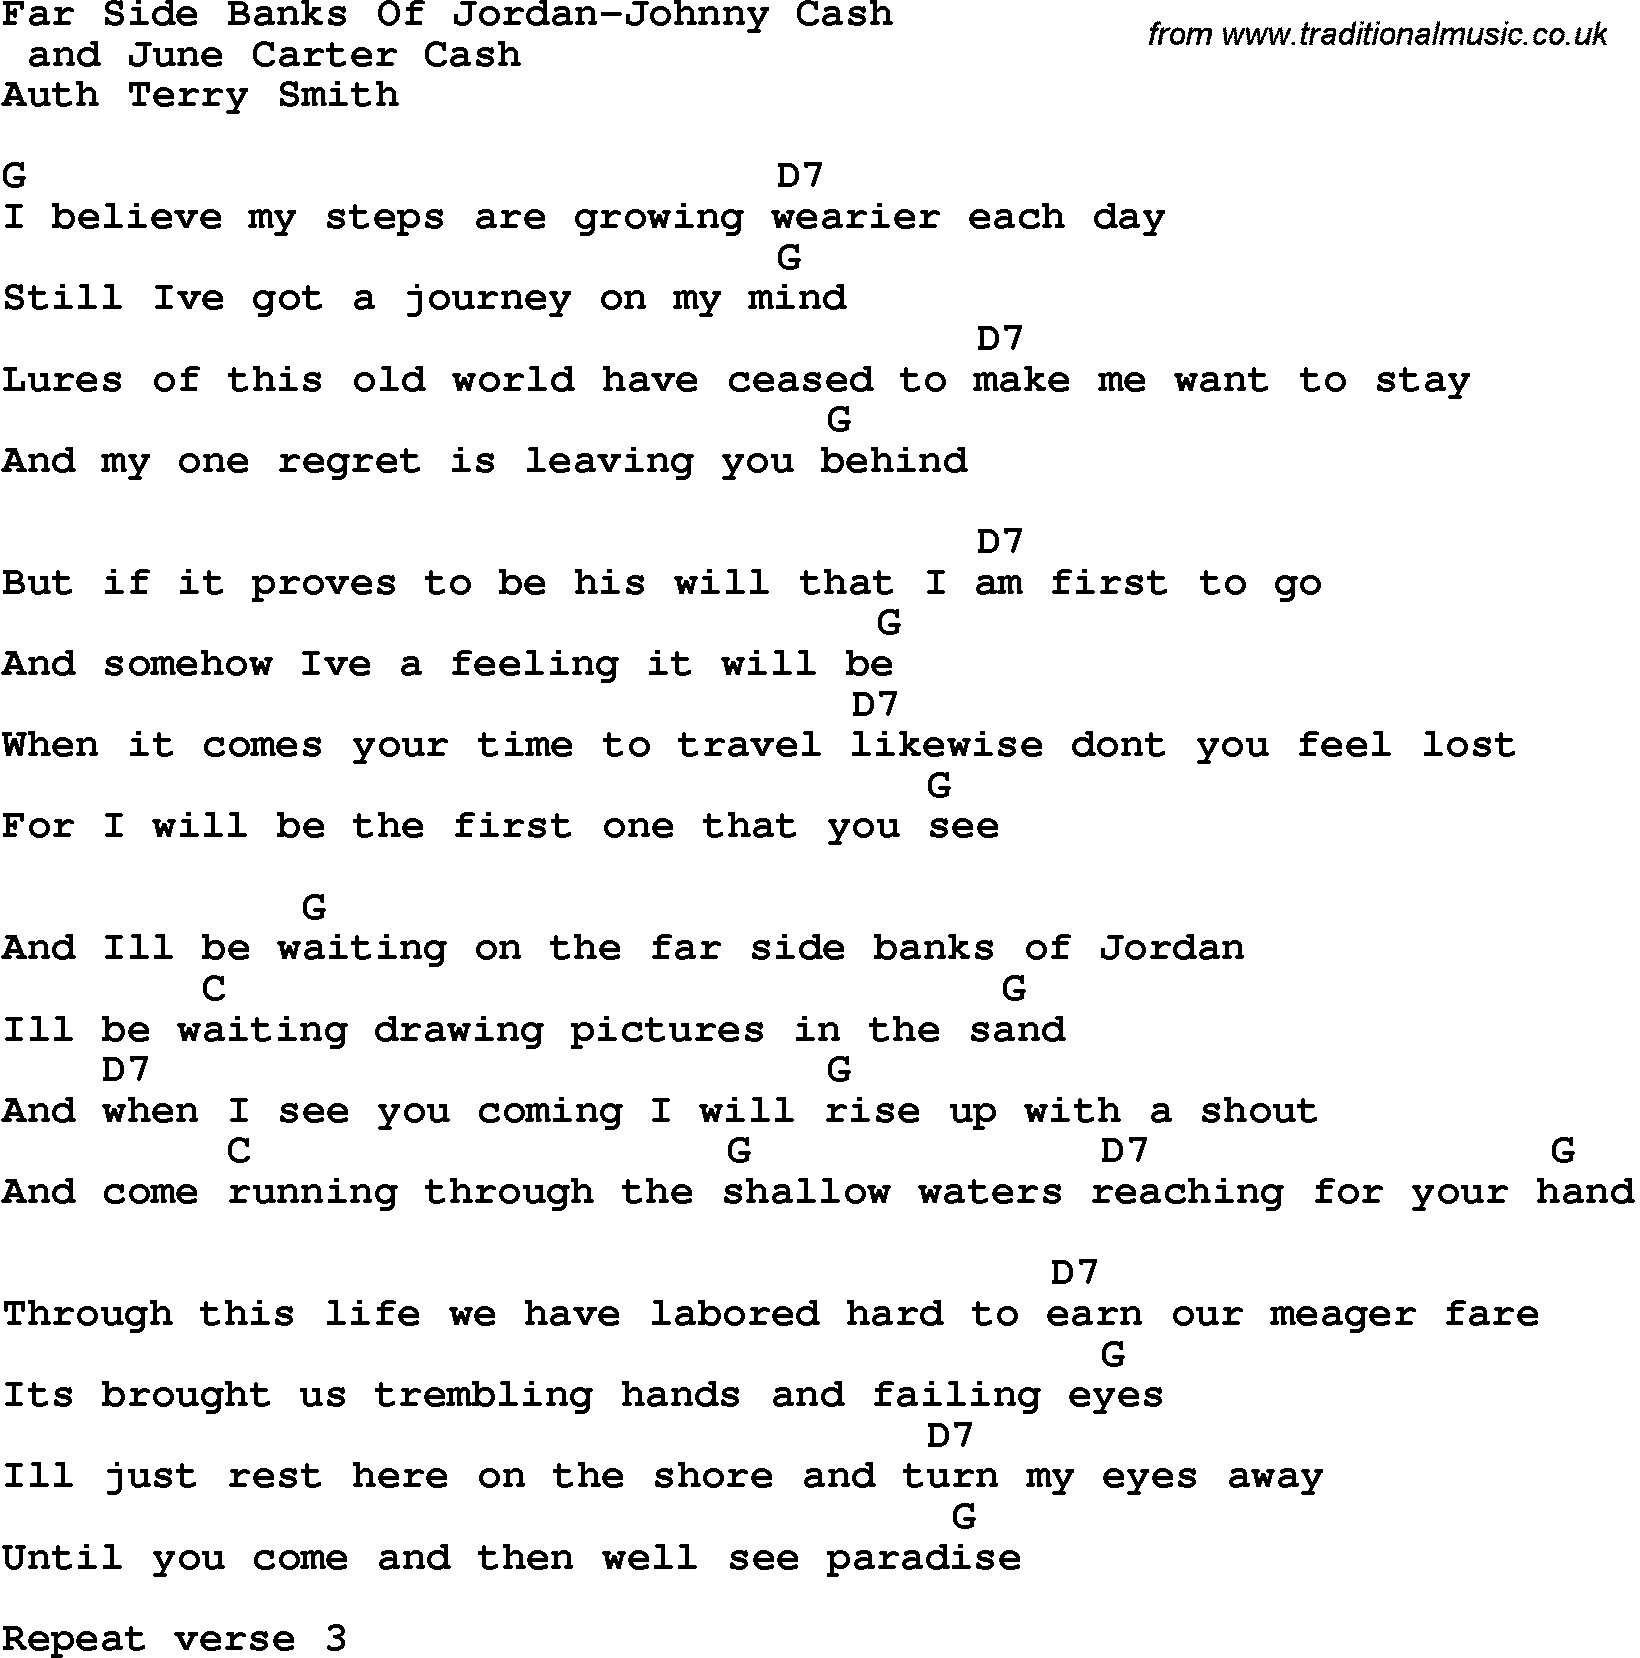 Country, Southern and Bluegrass Gospel Song Far Side Banks Of Jordan-Johnny Cash lyrics and chords